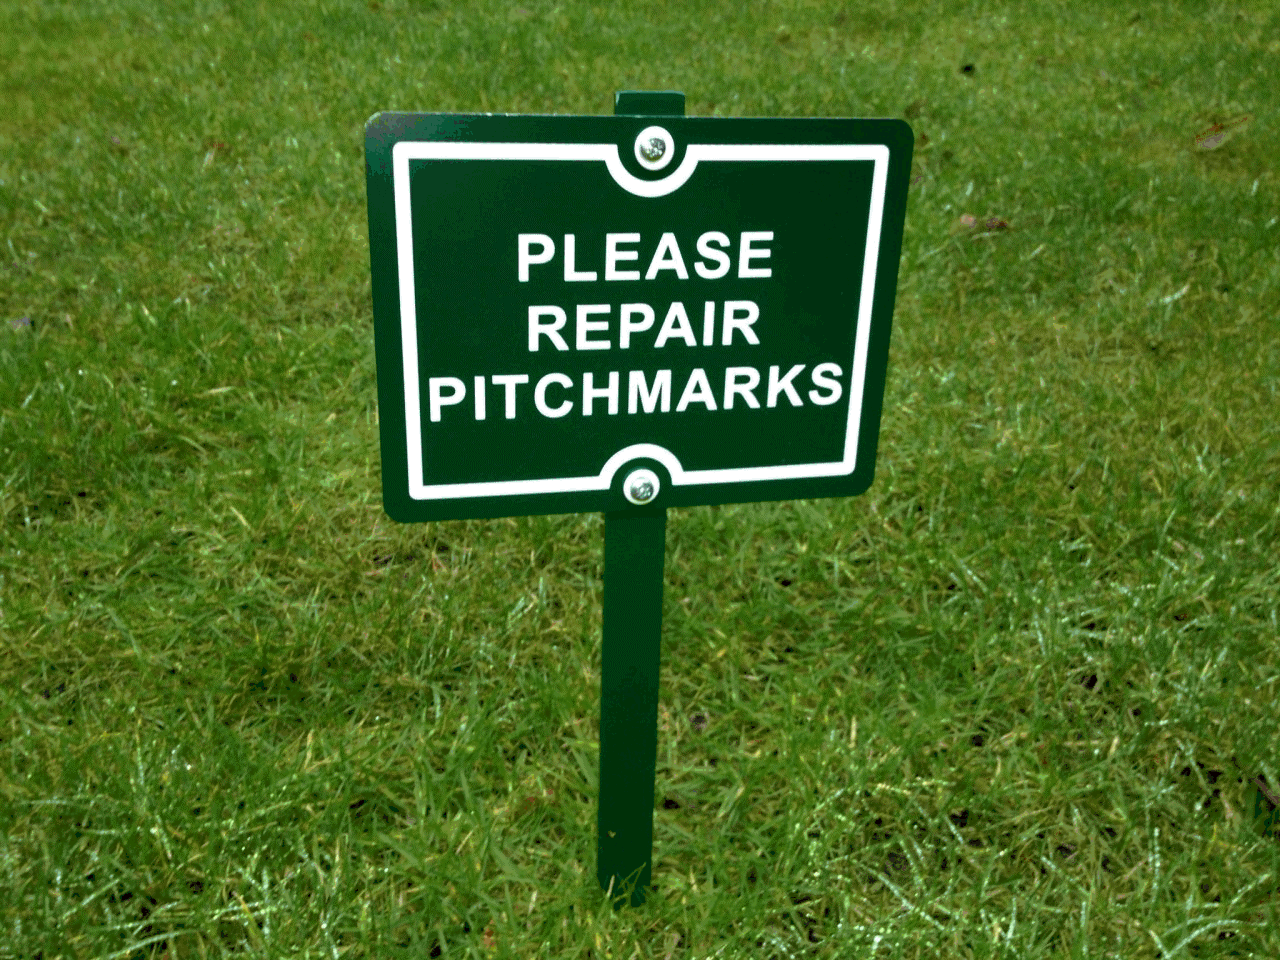 Please repair pitchmarks